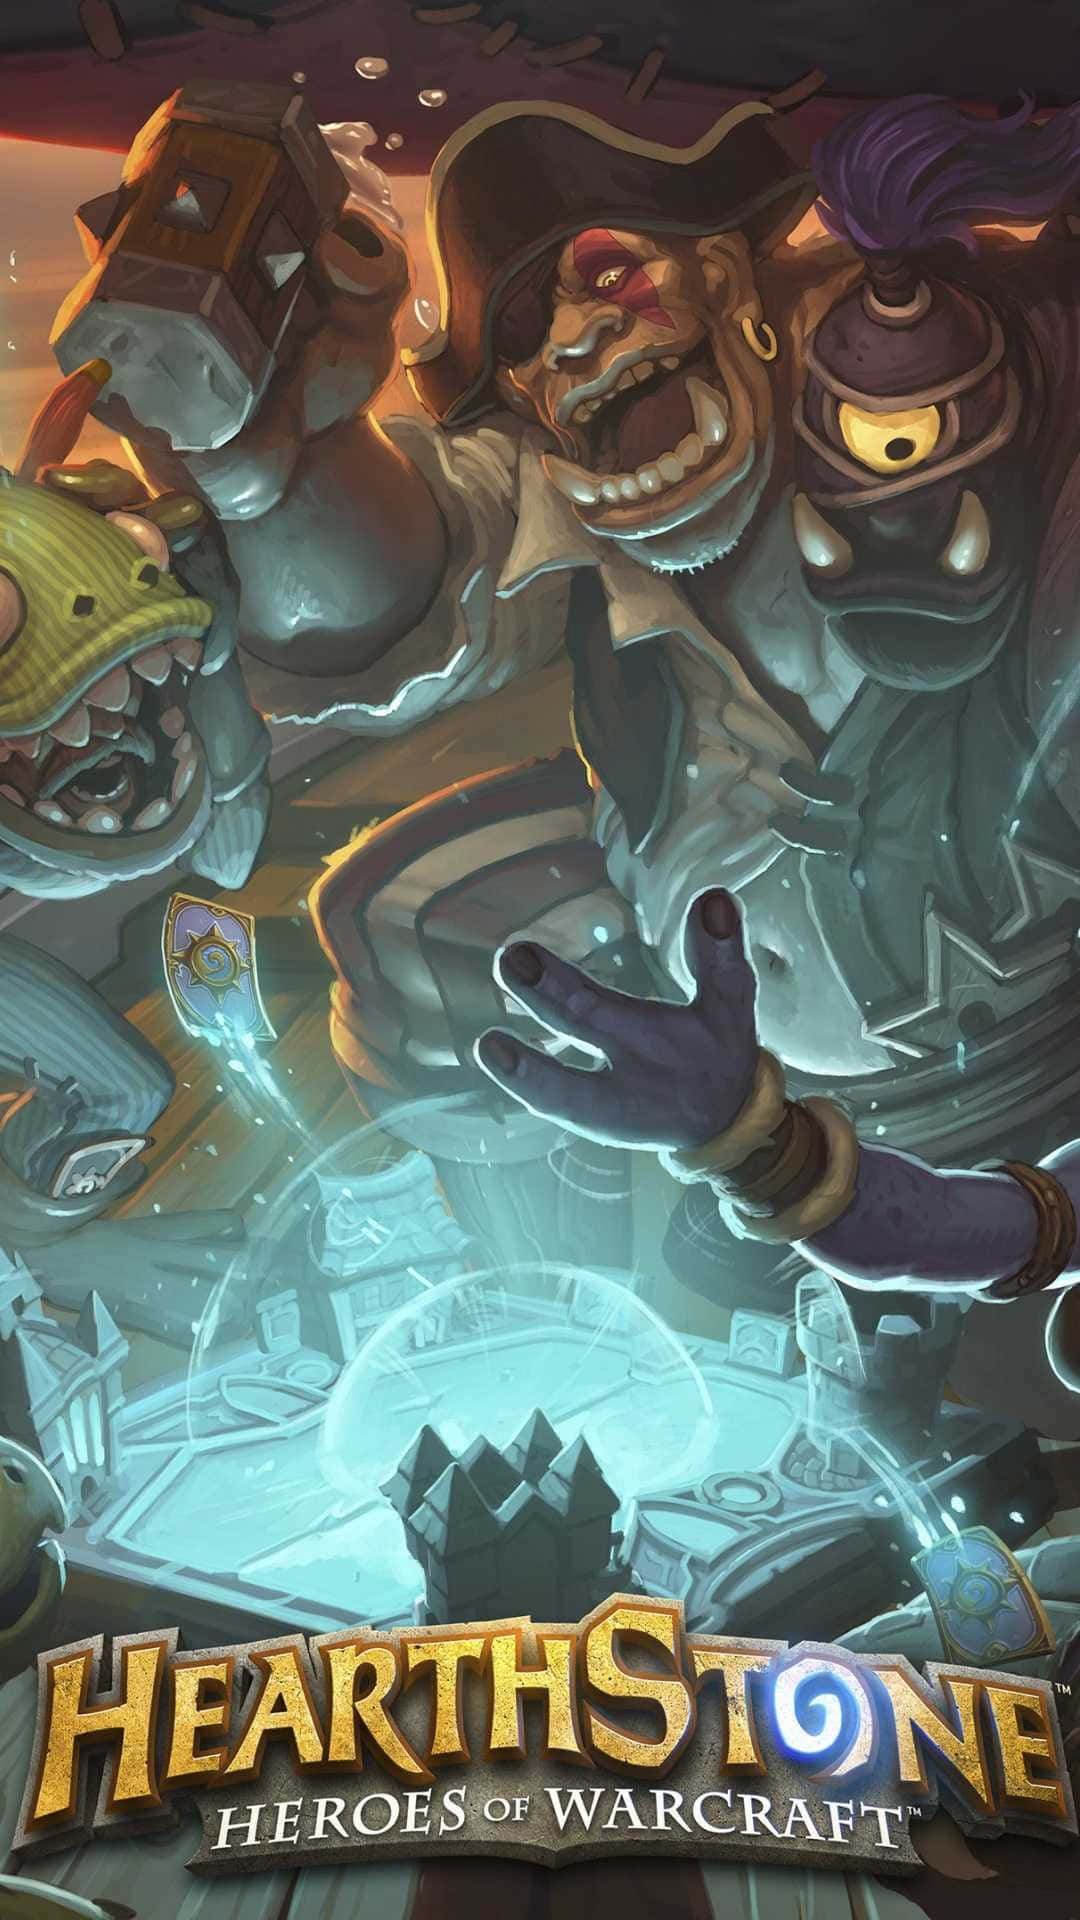 Androidhearthstone Heroes Of Warcraft Bakgrundsposter